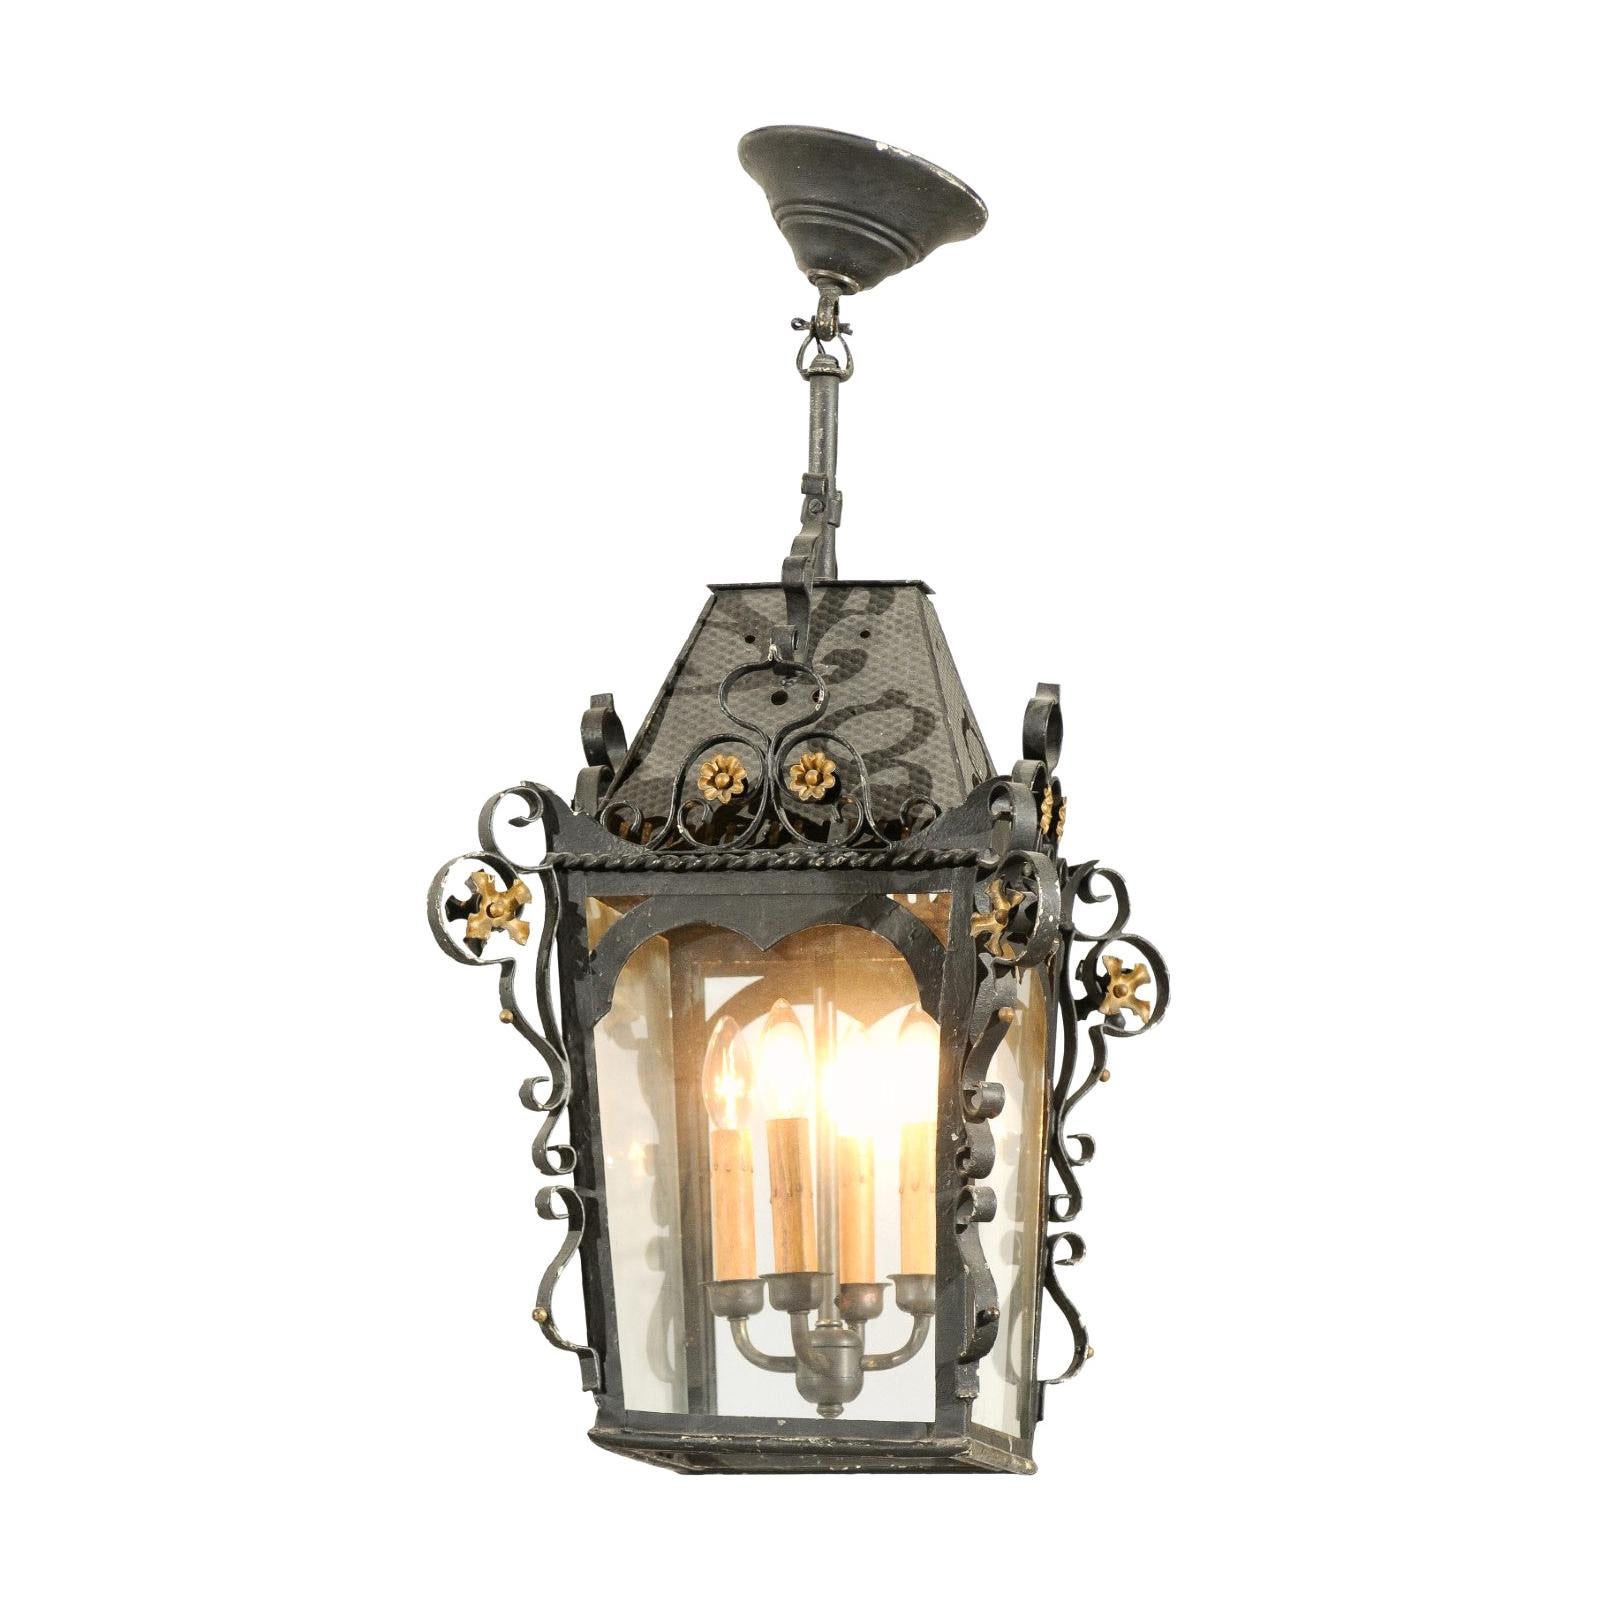 Swedish 1890s Black Iron Three-Arm Lantern with Gilt Floral Accents and Scrolls